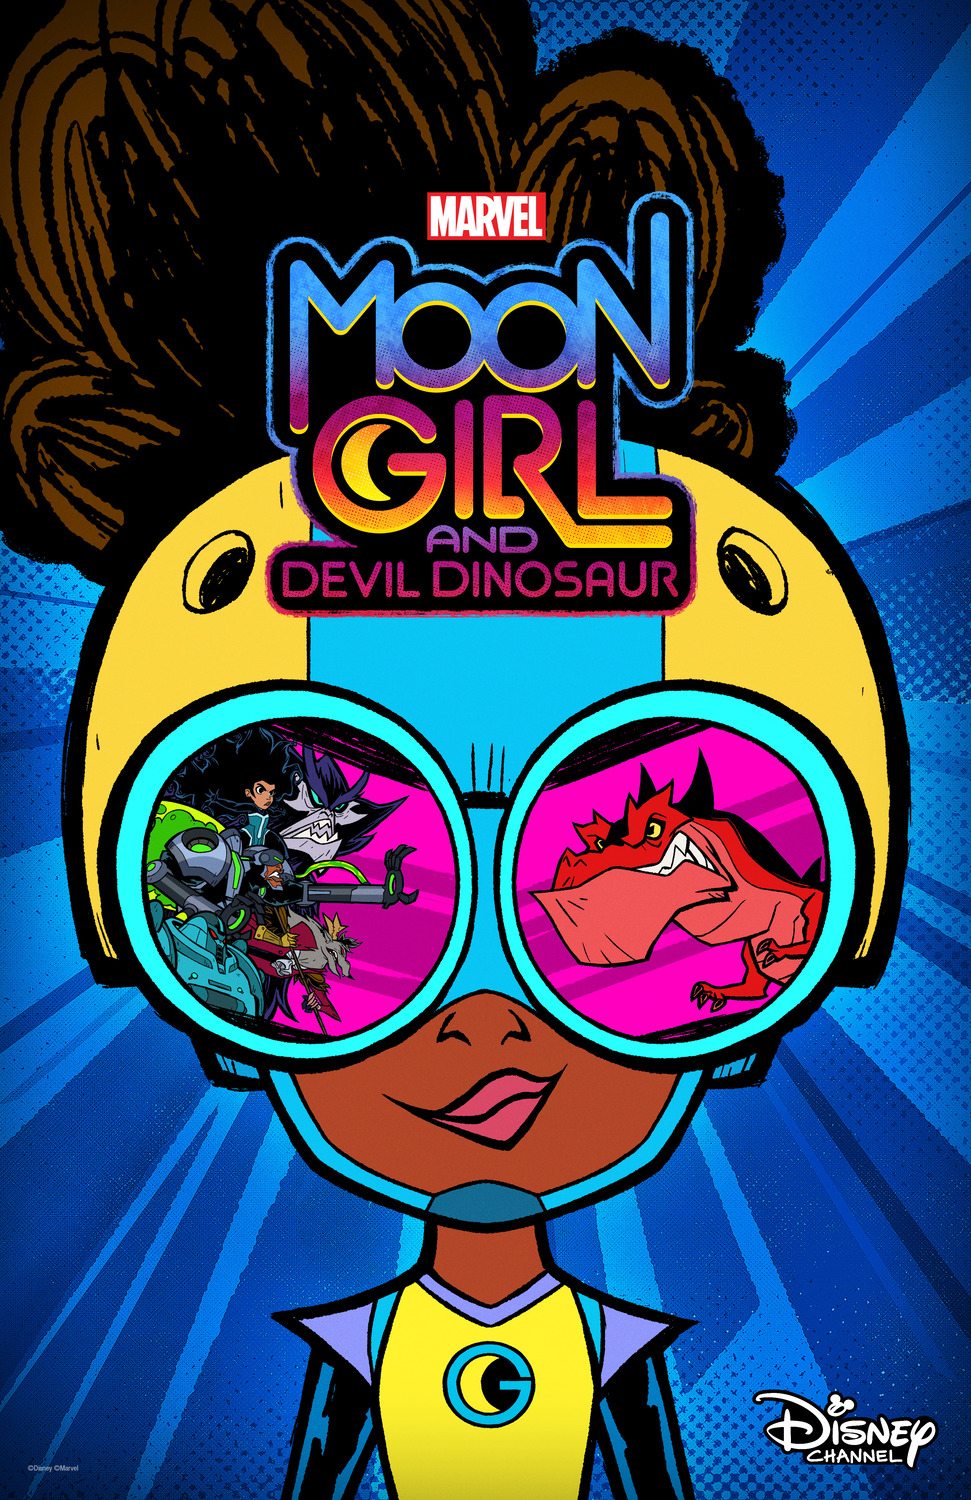 Extra Large Movie Poster Image for Marvel's Moon Girl and Devil Dinosaur 